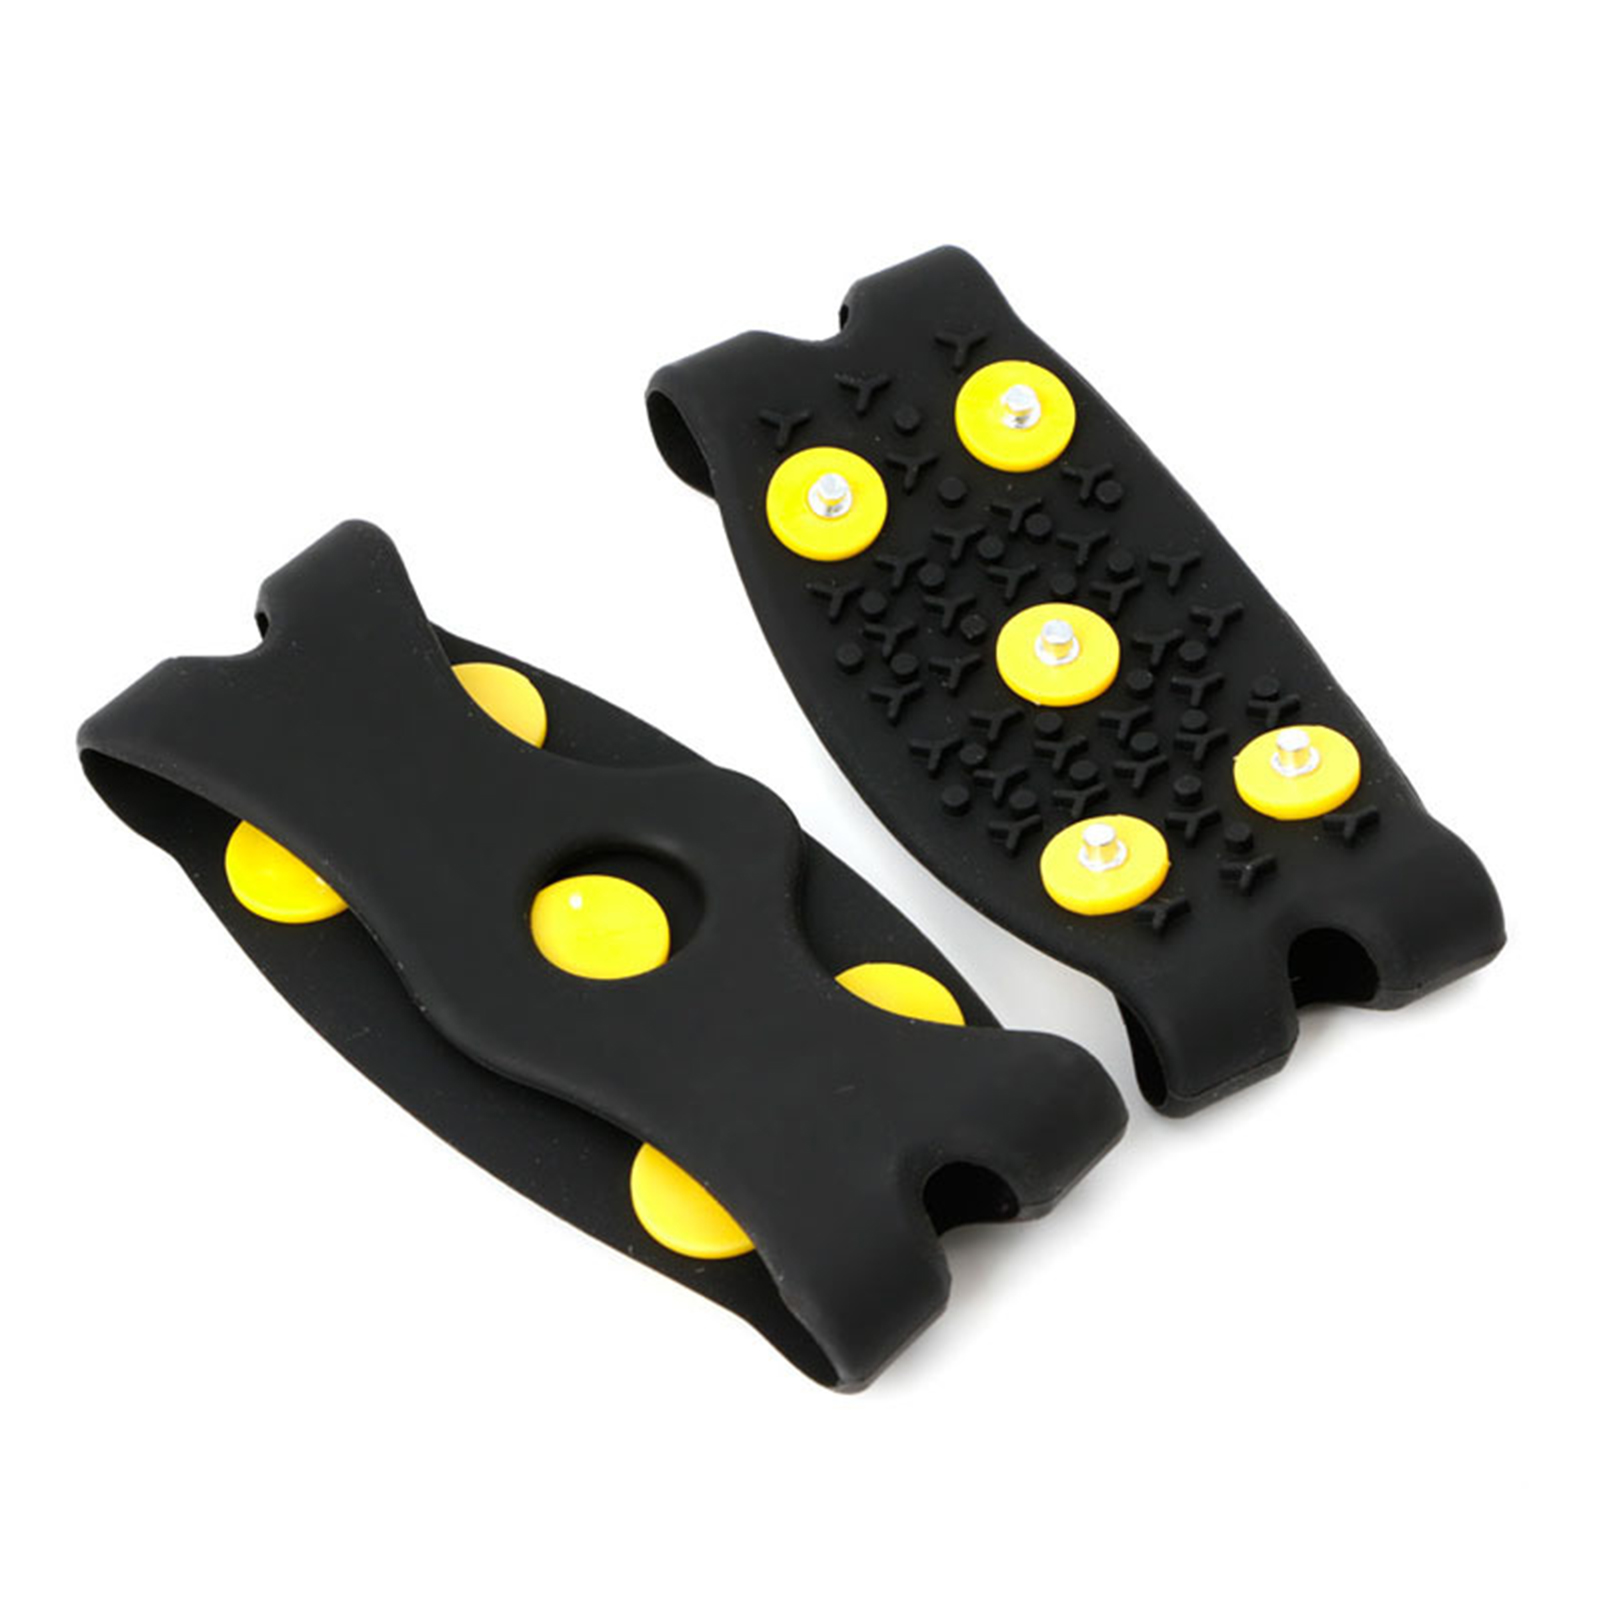 SPRING PARK 1 Pair 5-Stud Shoes Cover Non-Slip Silicone Shoes Cover Crampon Snow Anti Slip Spikes Grips Crampon Cleats Shoes Accessories (Black) - image 2 of 6